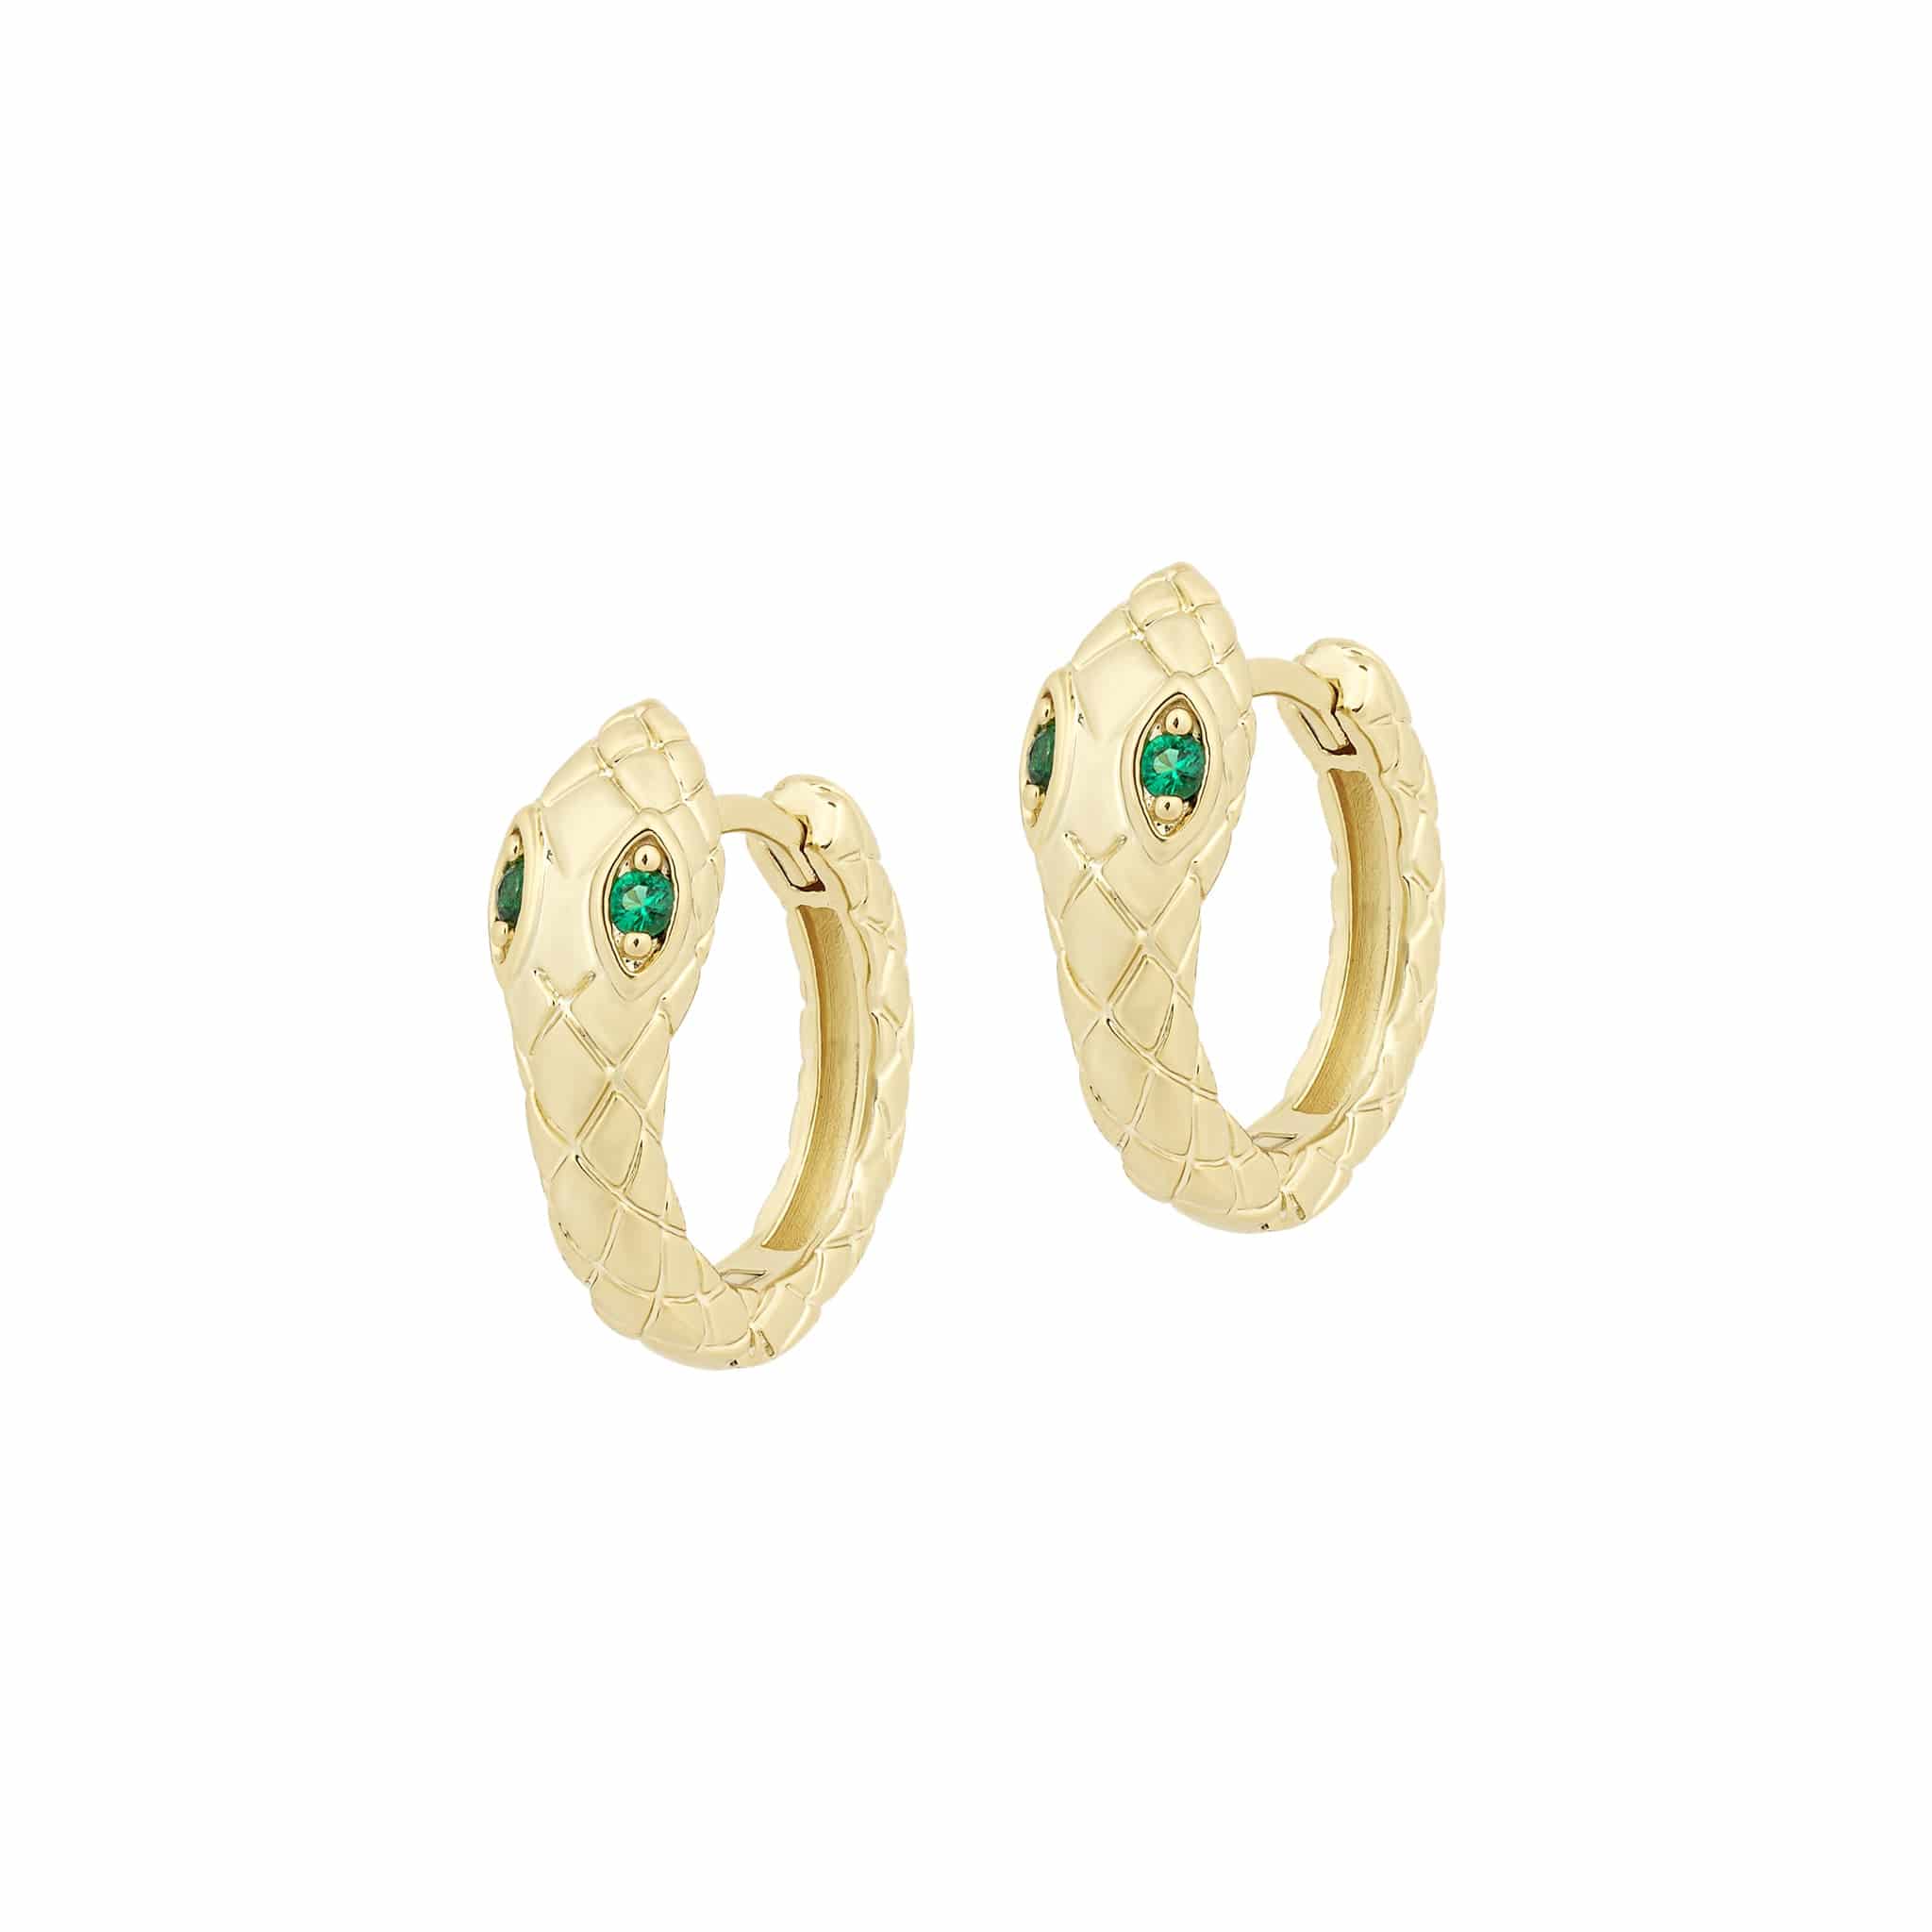 Emerald Serpent Earrings - The Gilded Witch